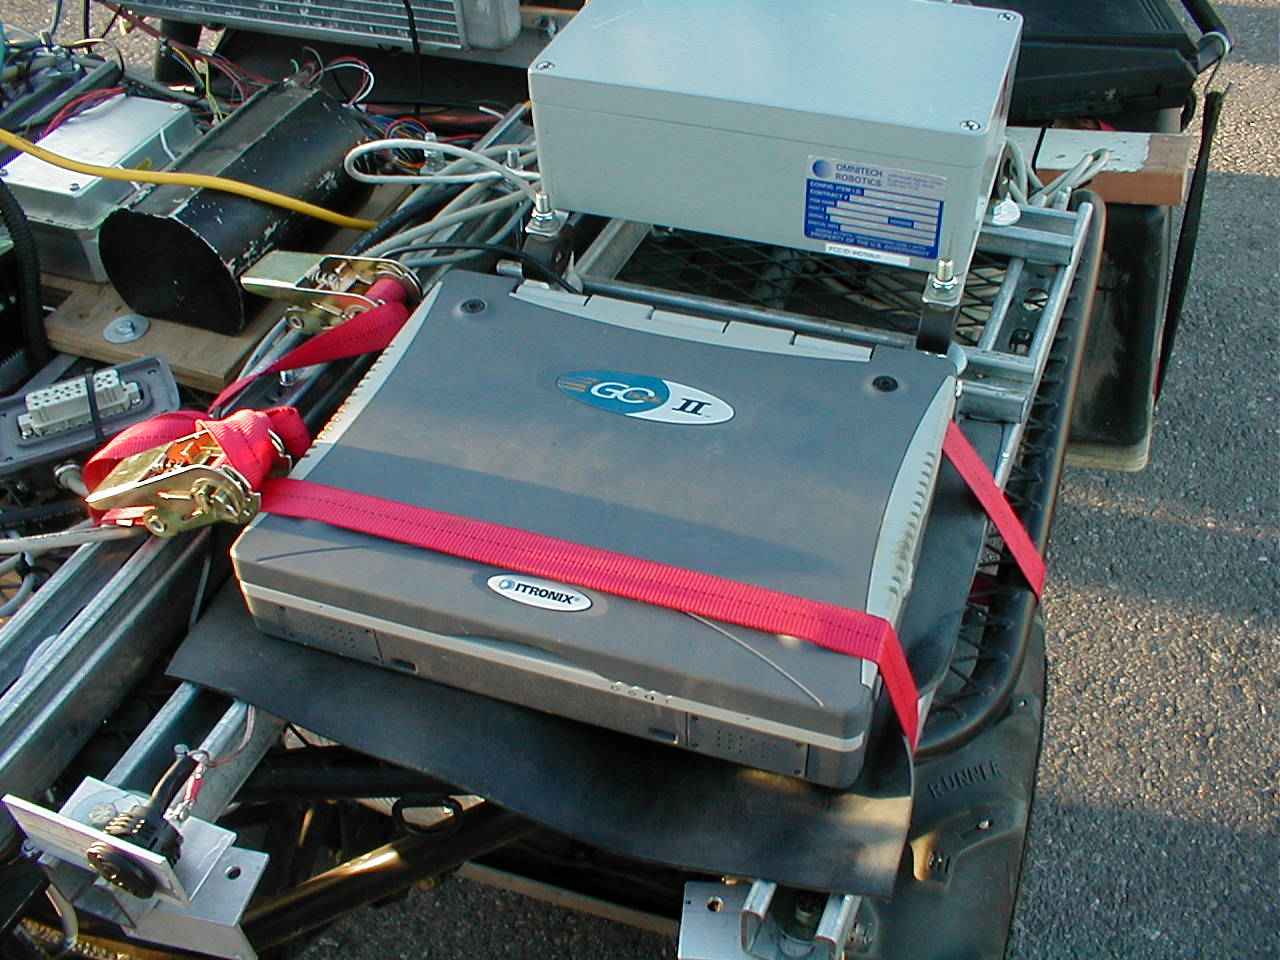 A few teams used hardened laptops for vehicle control. SciAutonics'
                  Rascal used an Itronix GoBook.